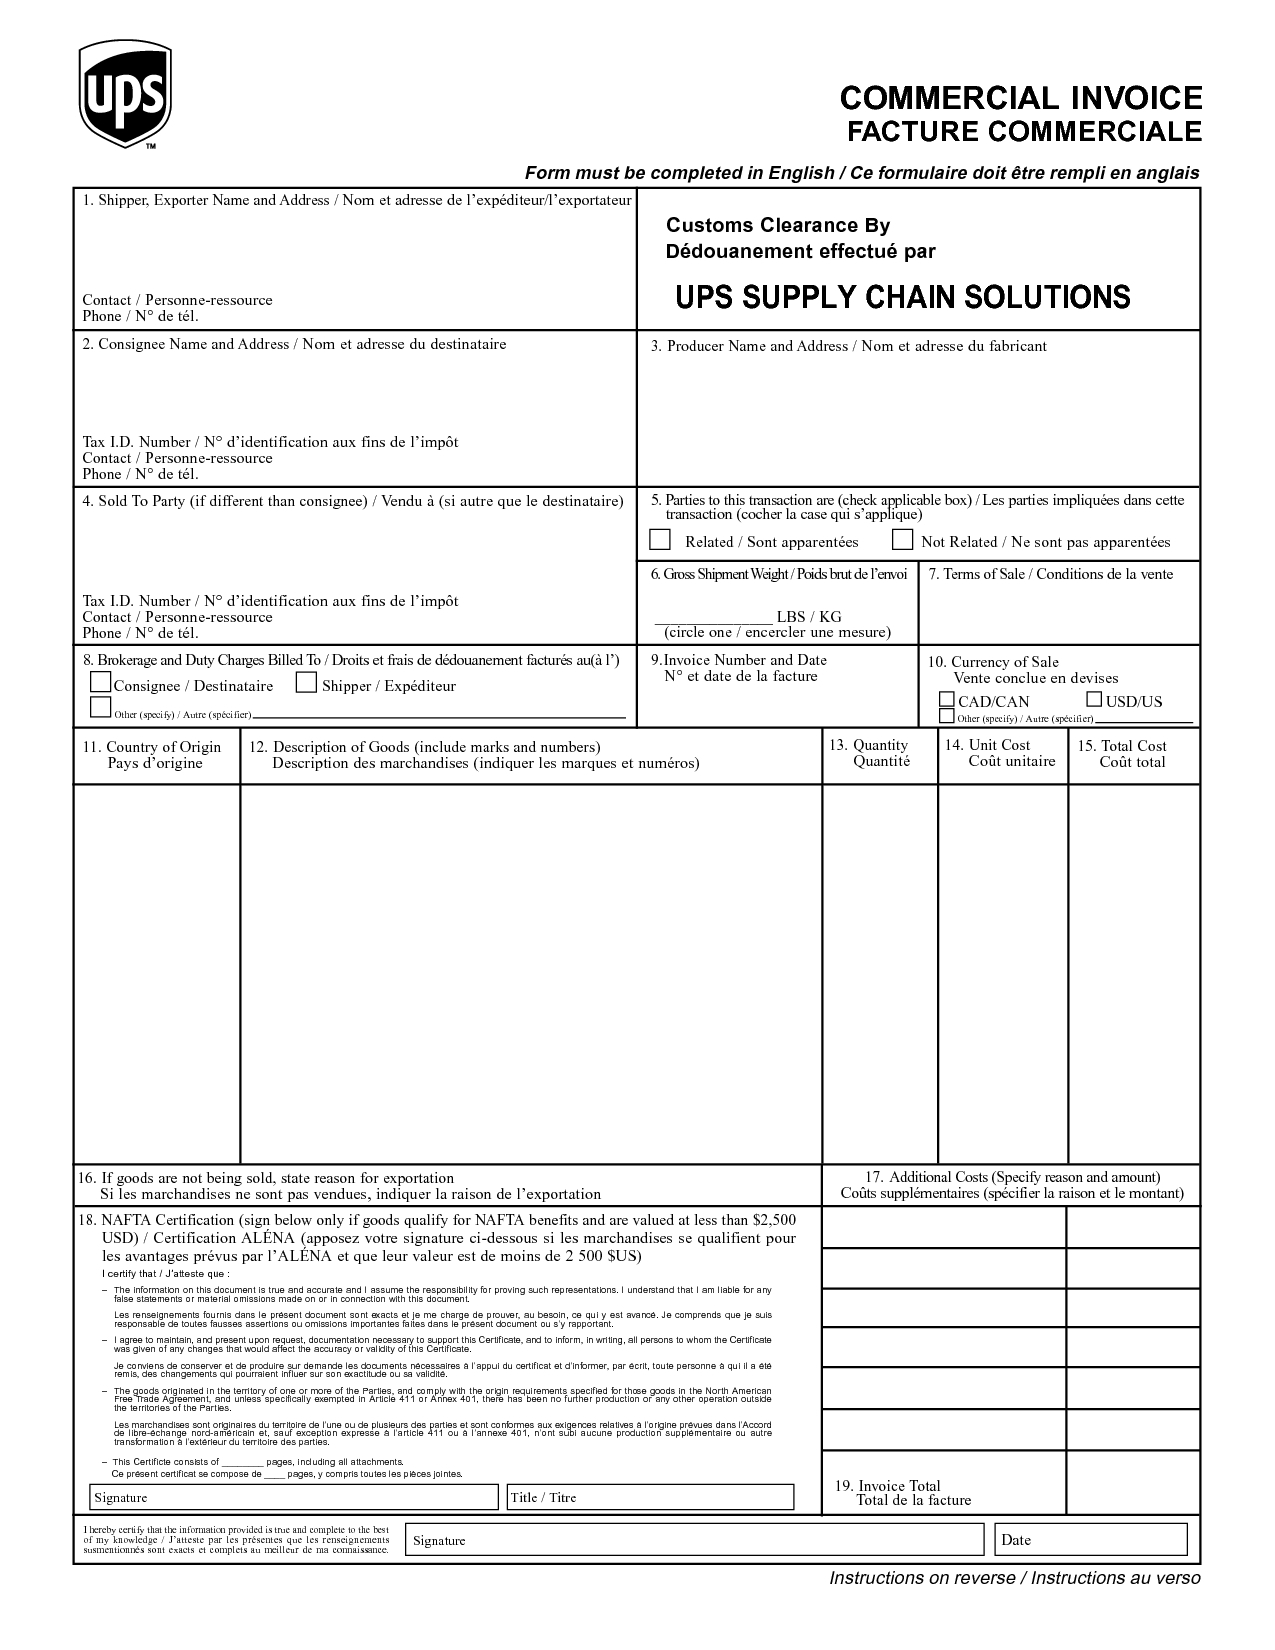 UPS Commercial Invoice Template Dhl commercial invoice template